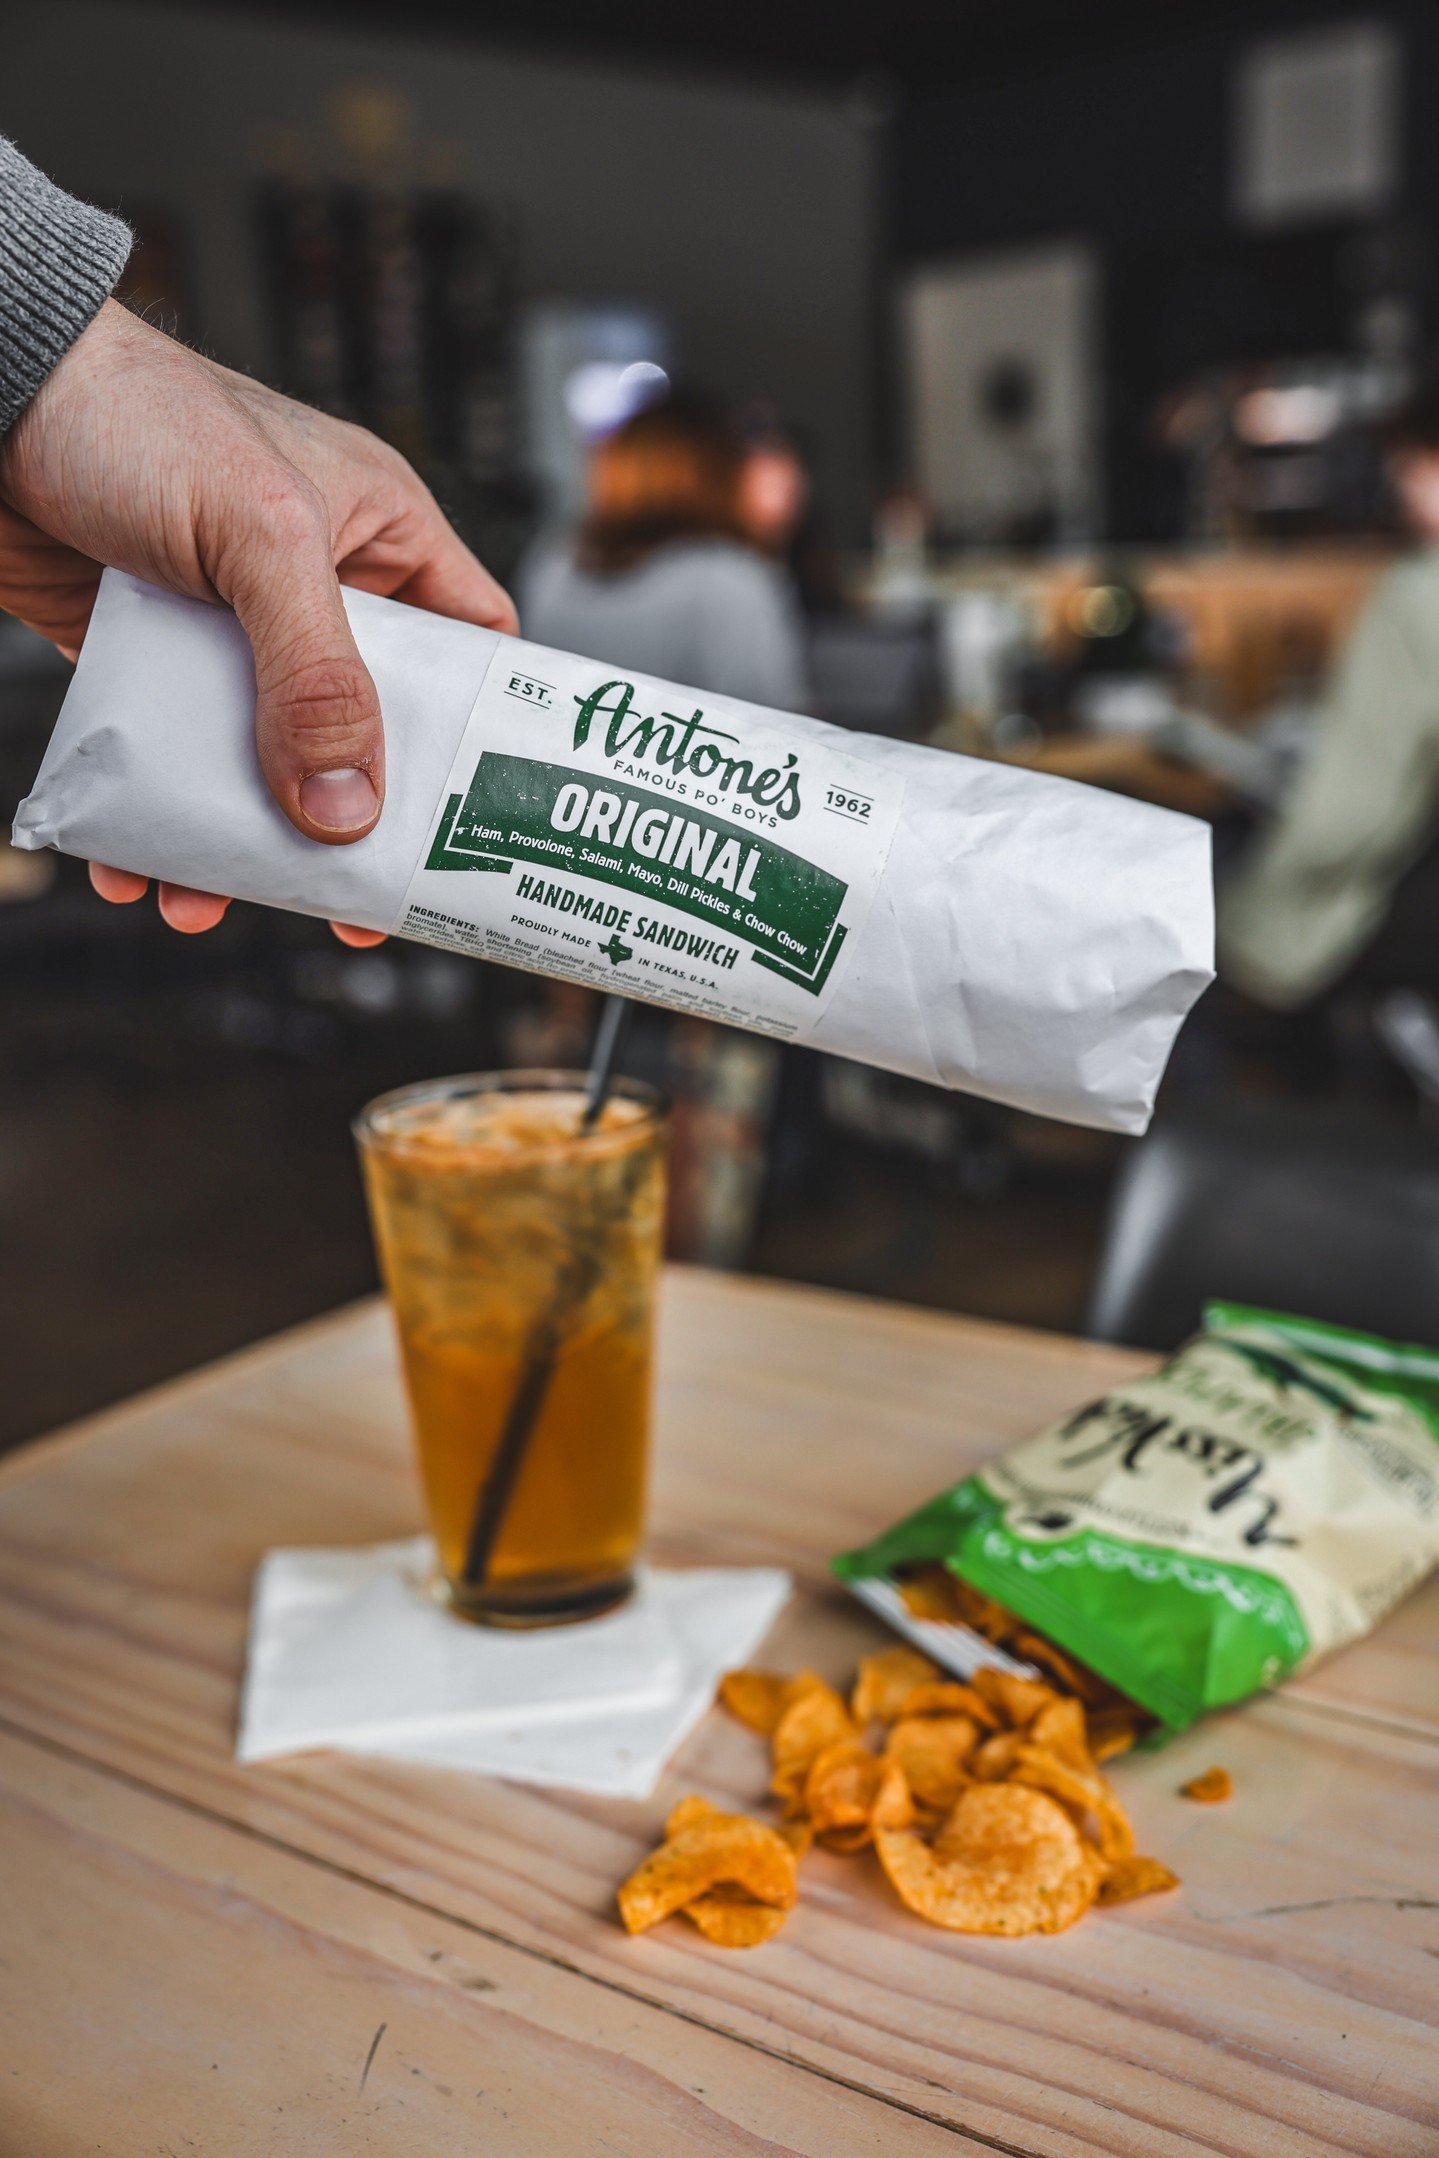 Power through your study sessions or work day the Lighthouse way! 🤍
ㅤ
There's nothing worse than when hunger hits and you're in your focus flow. 🫠
ㅤ
Our new Antone's Famous Po'boy subs are the perfect fuel for a study break or a quick bite between 